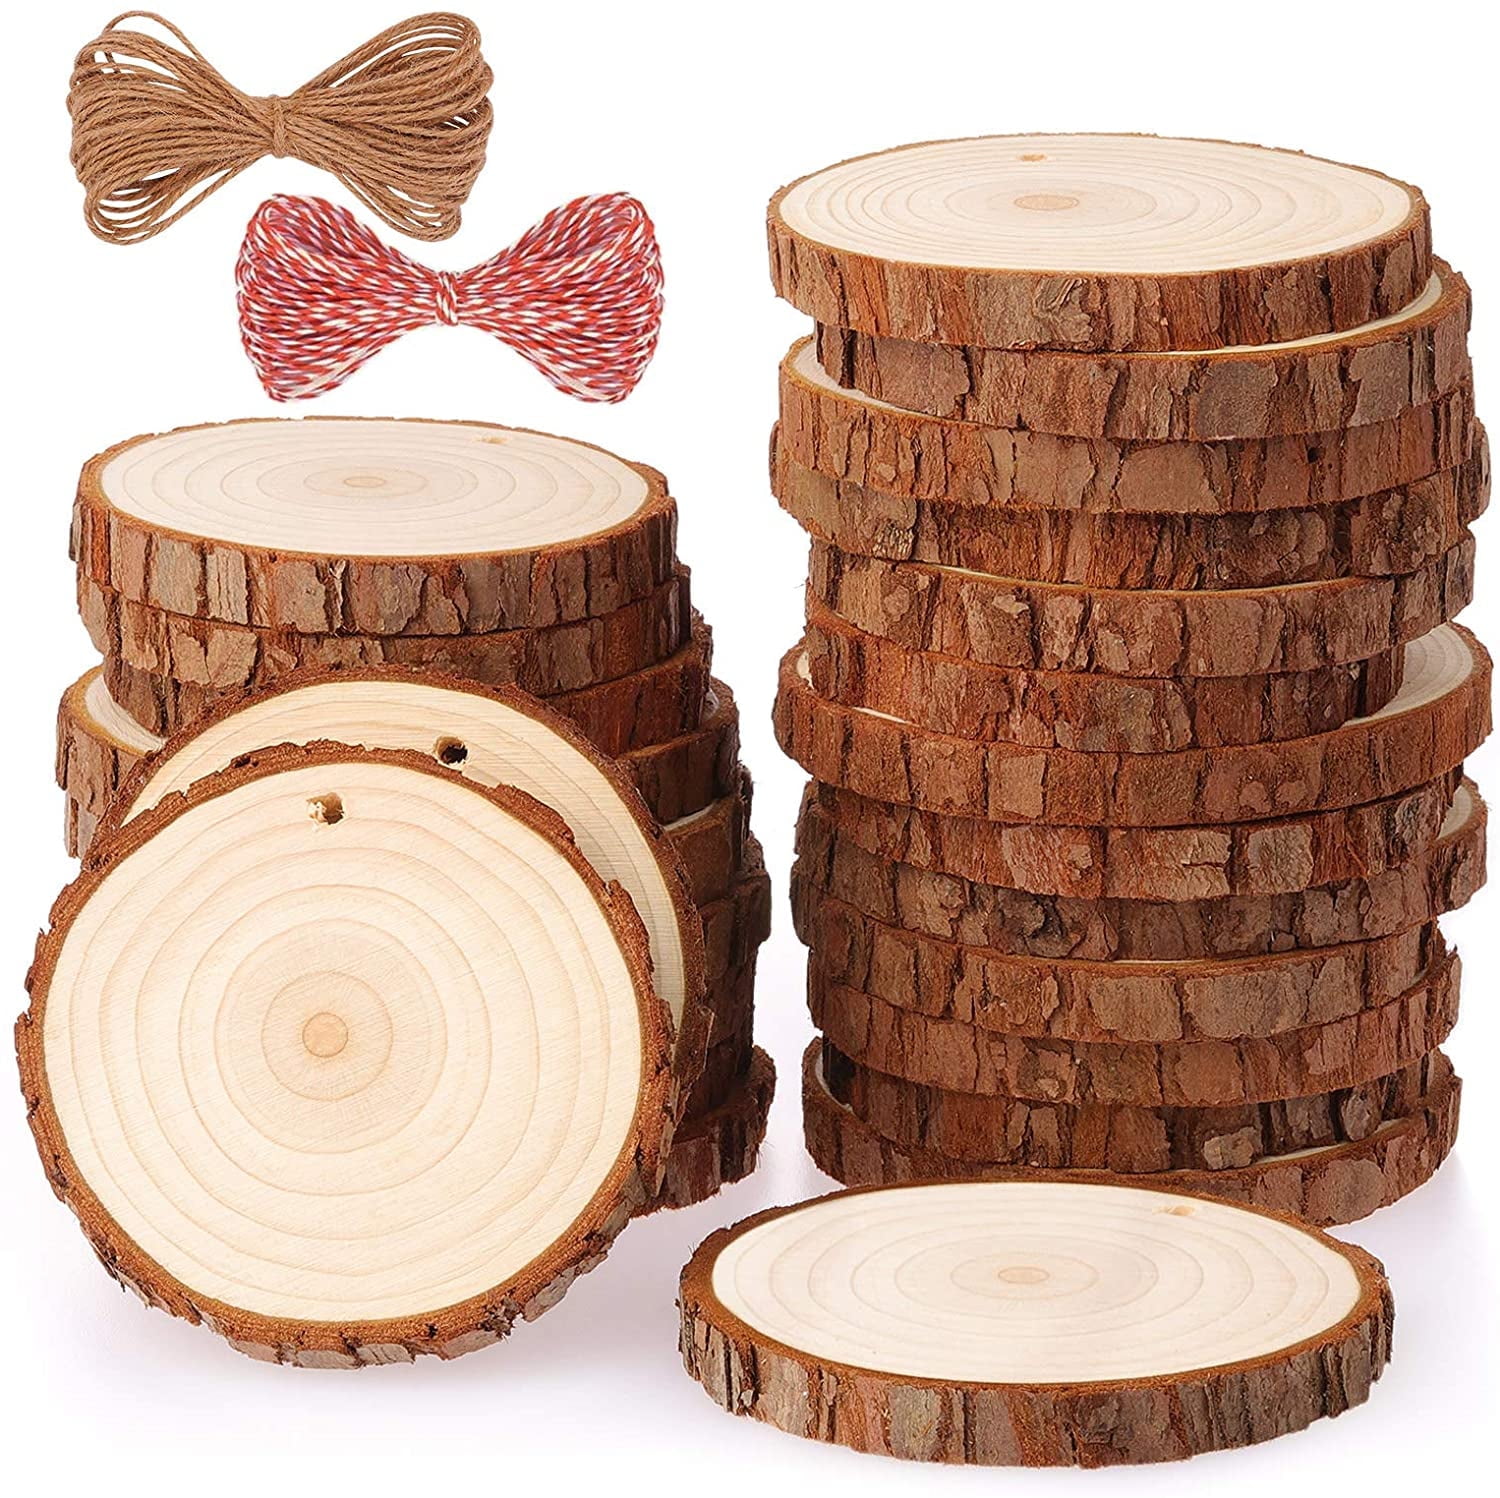 Fuyit Natural Wood Slices 25 Pcs 3.1-3.5 Inches Craft Wood Kit Unfinished  Predrilled with Hole Wooden Circles Tree Slices for Arts and Crafts  Christmas Ornaments DIY Crafts 